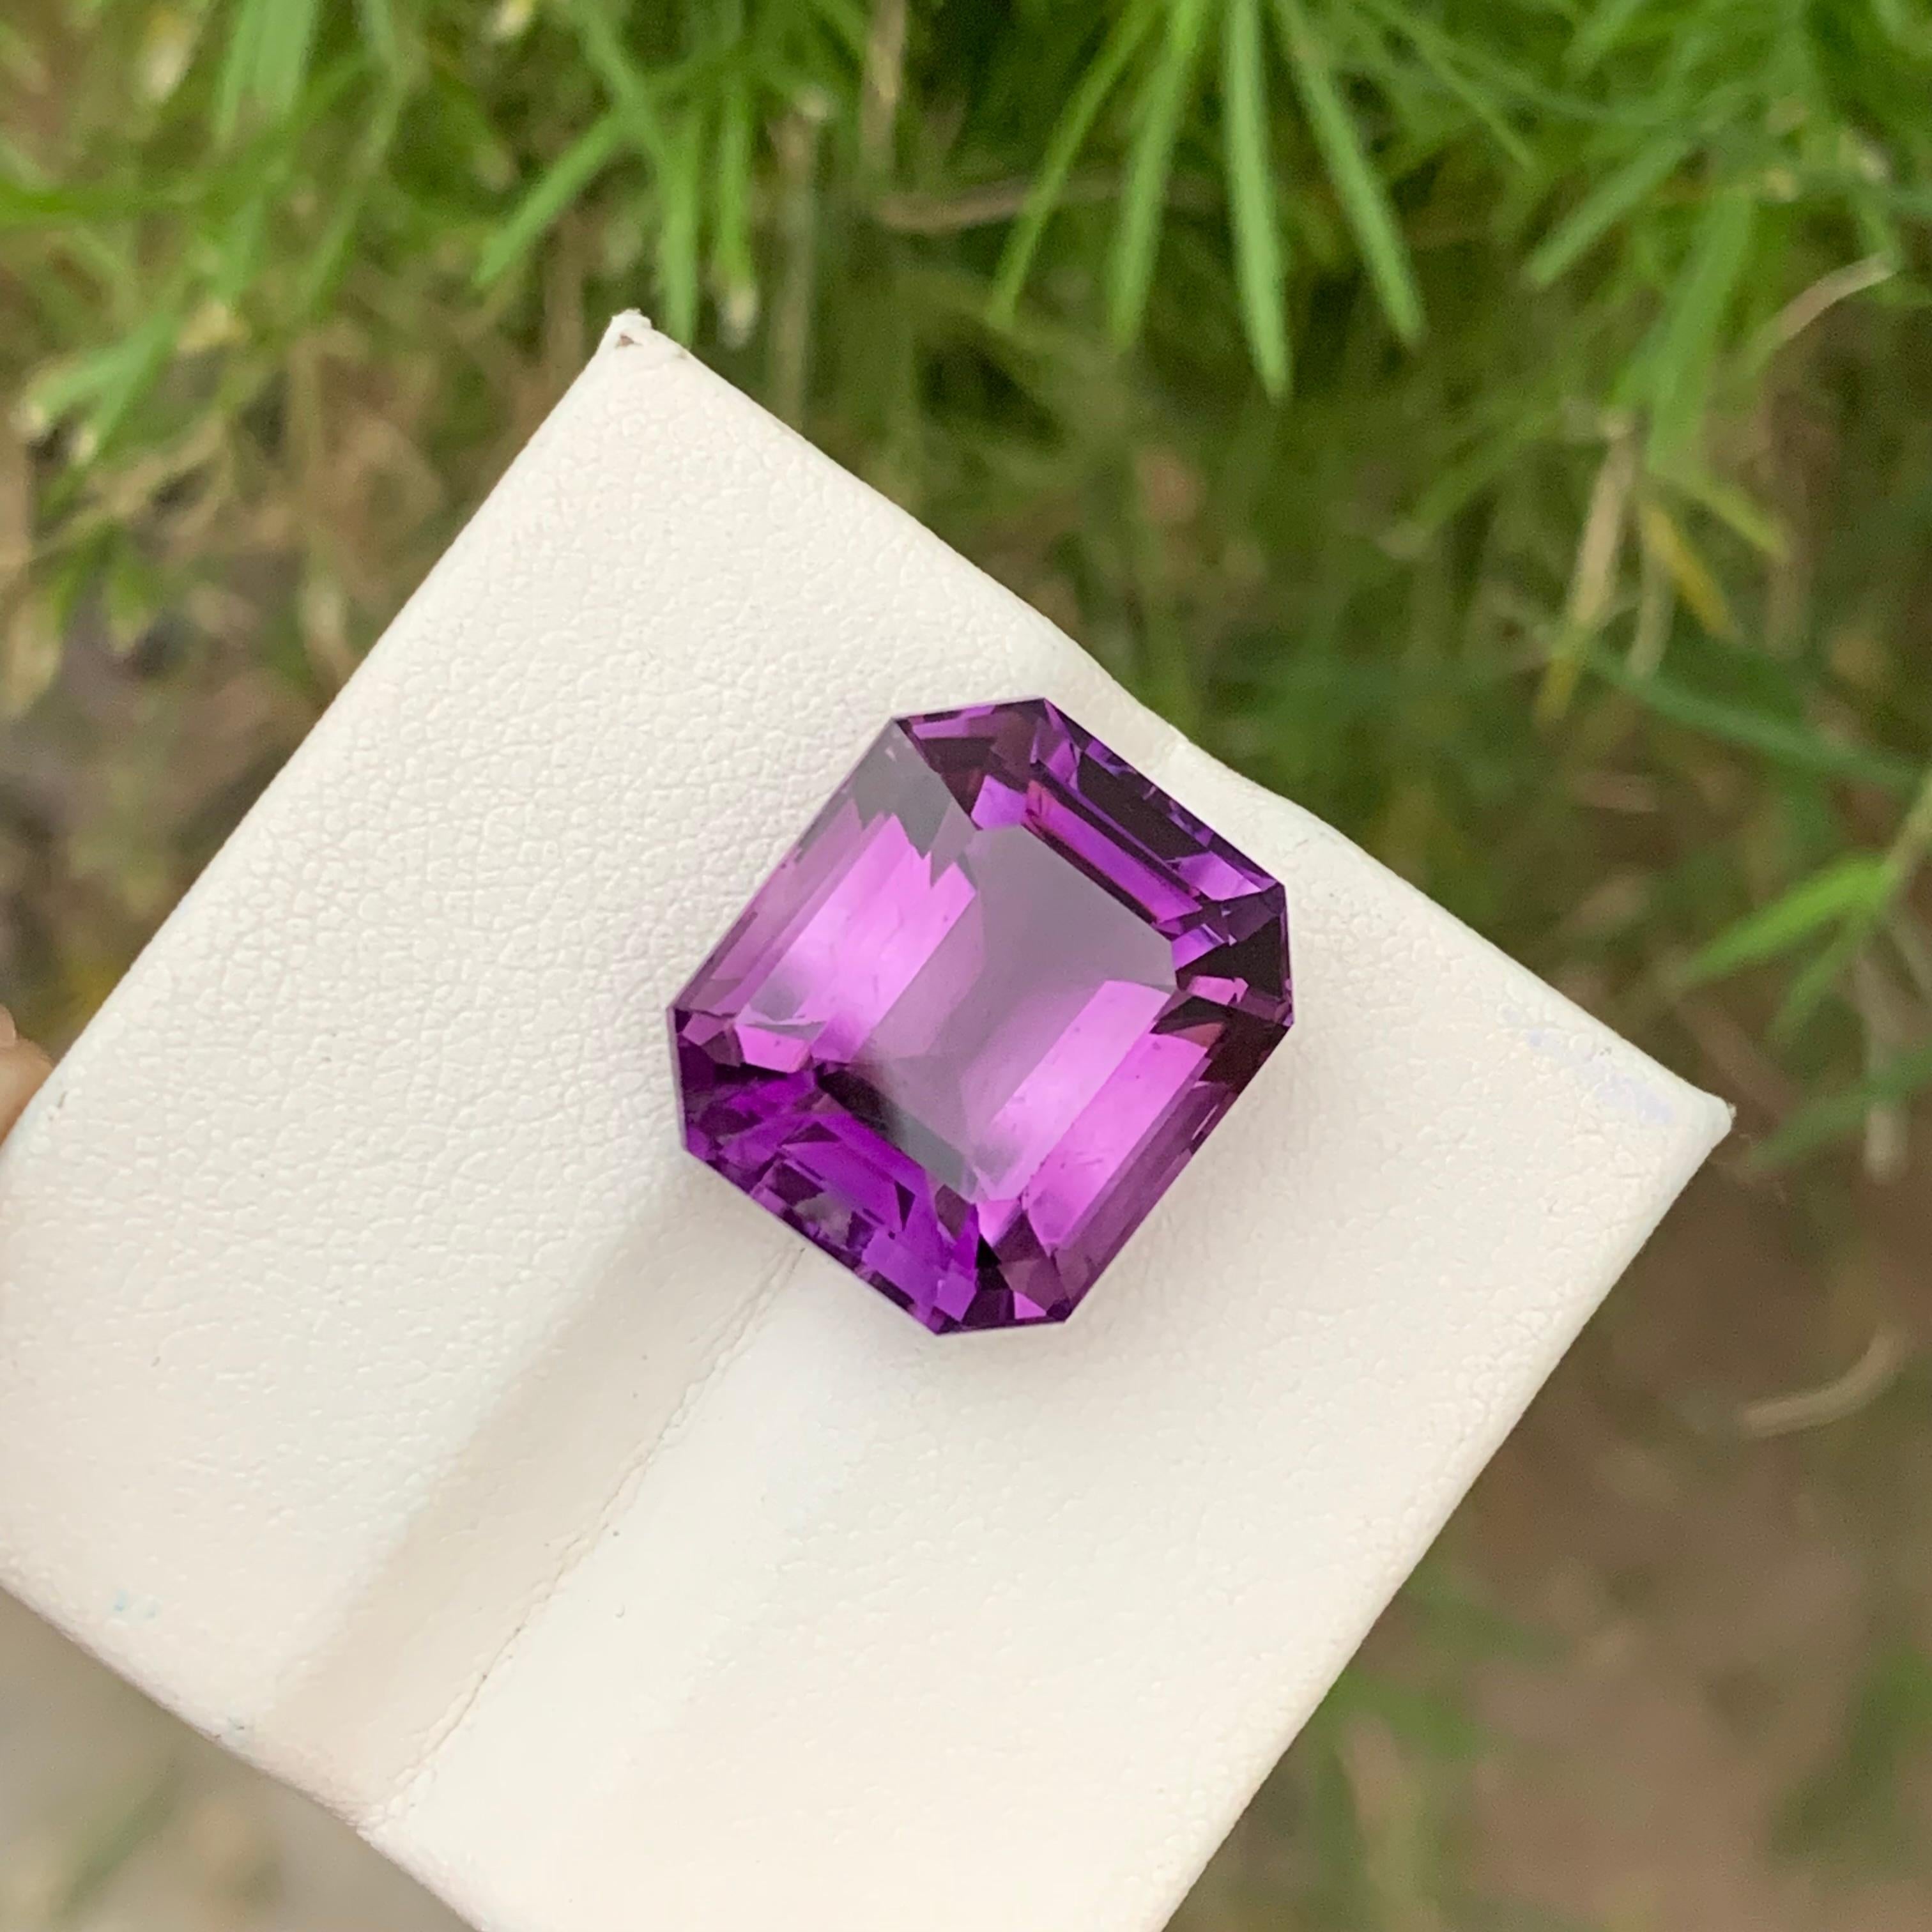 19.0 Carats Natural Loose Deep Purple Amethyst Gemstone From Brazil Mine For Sale 6